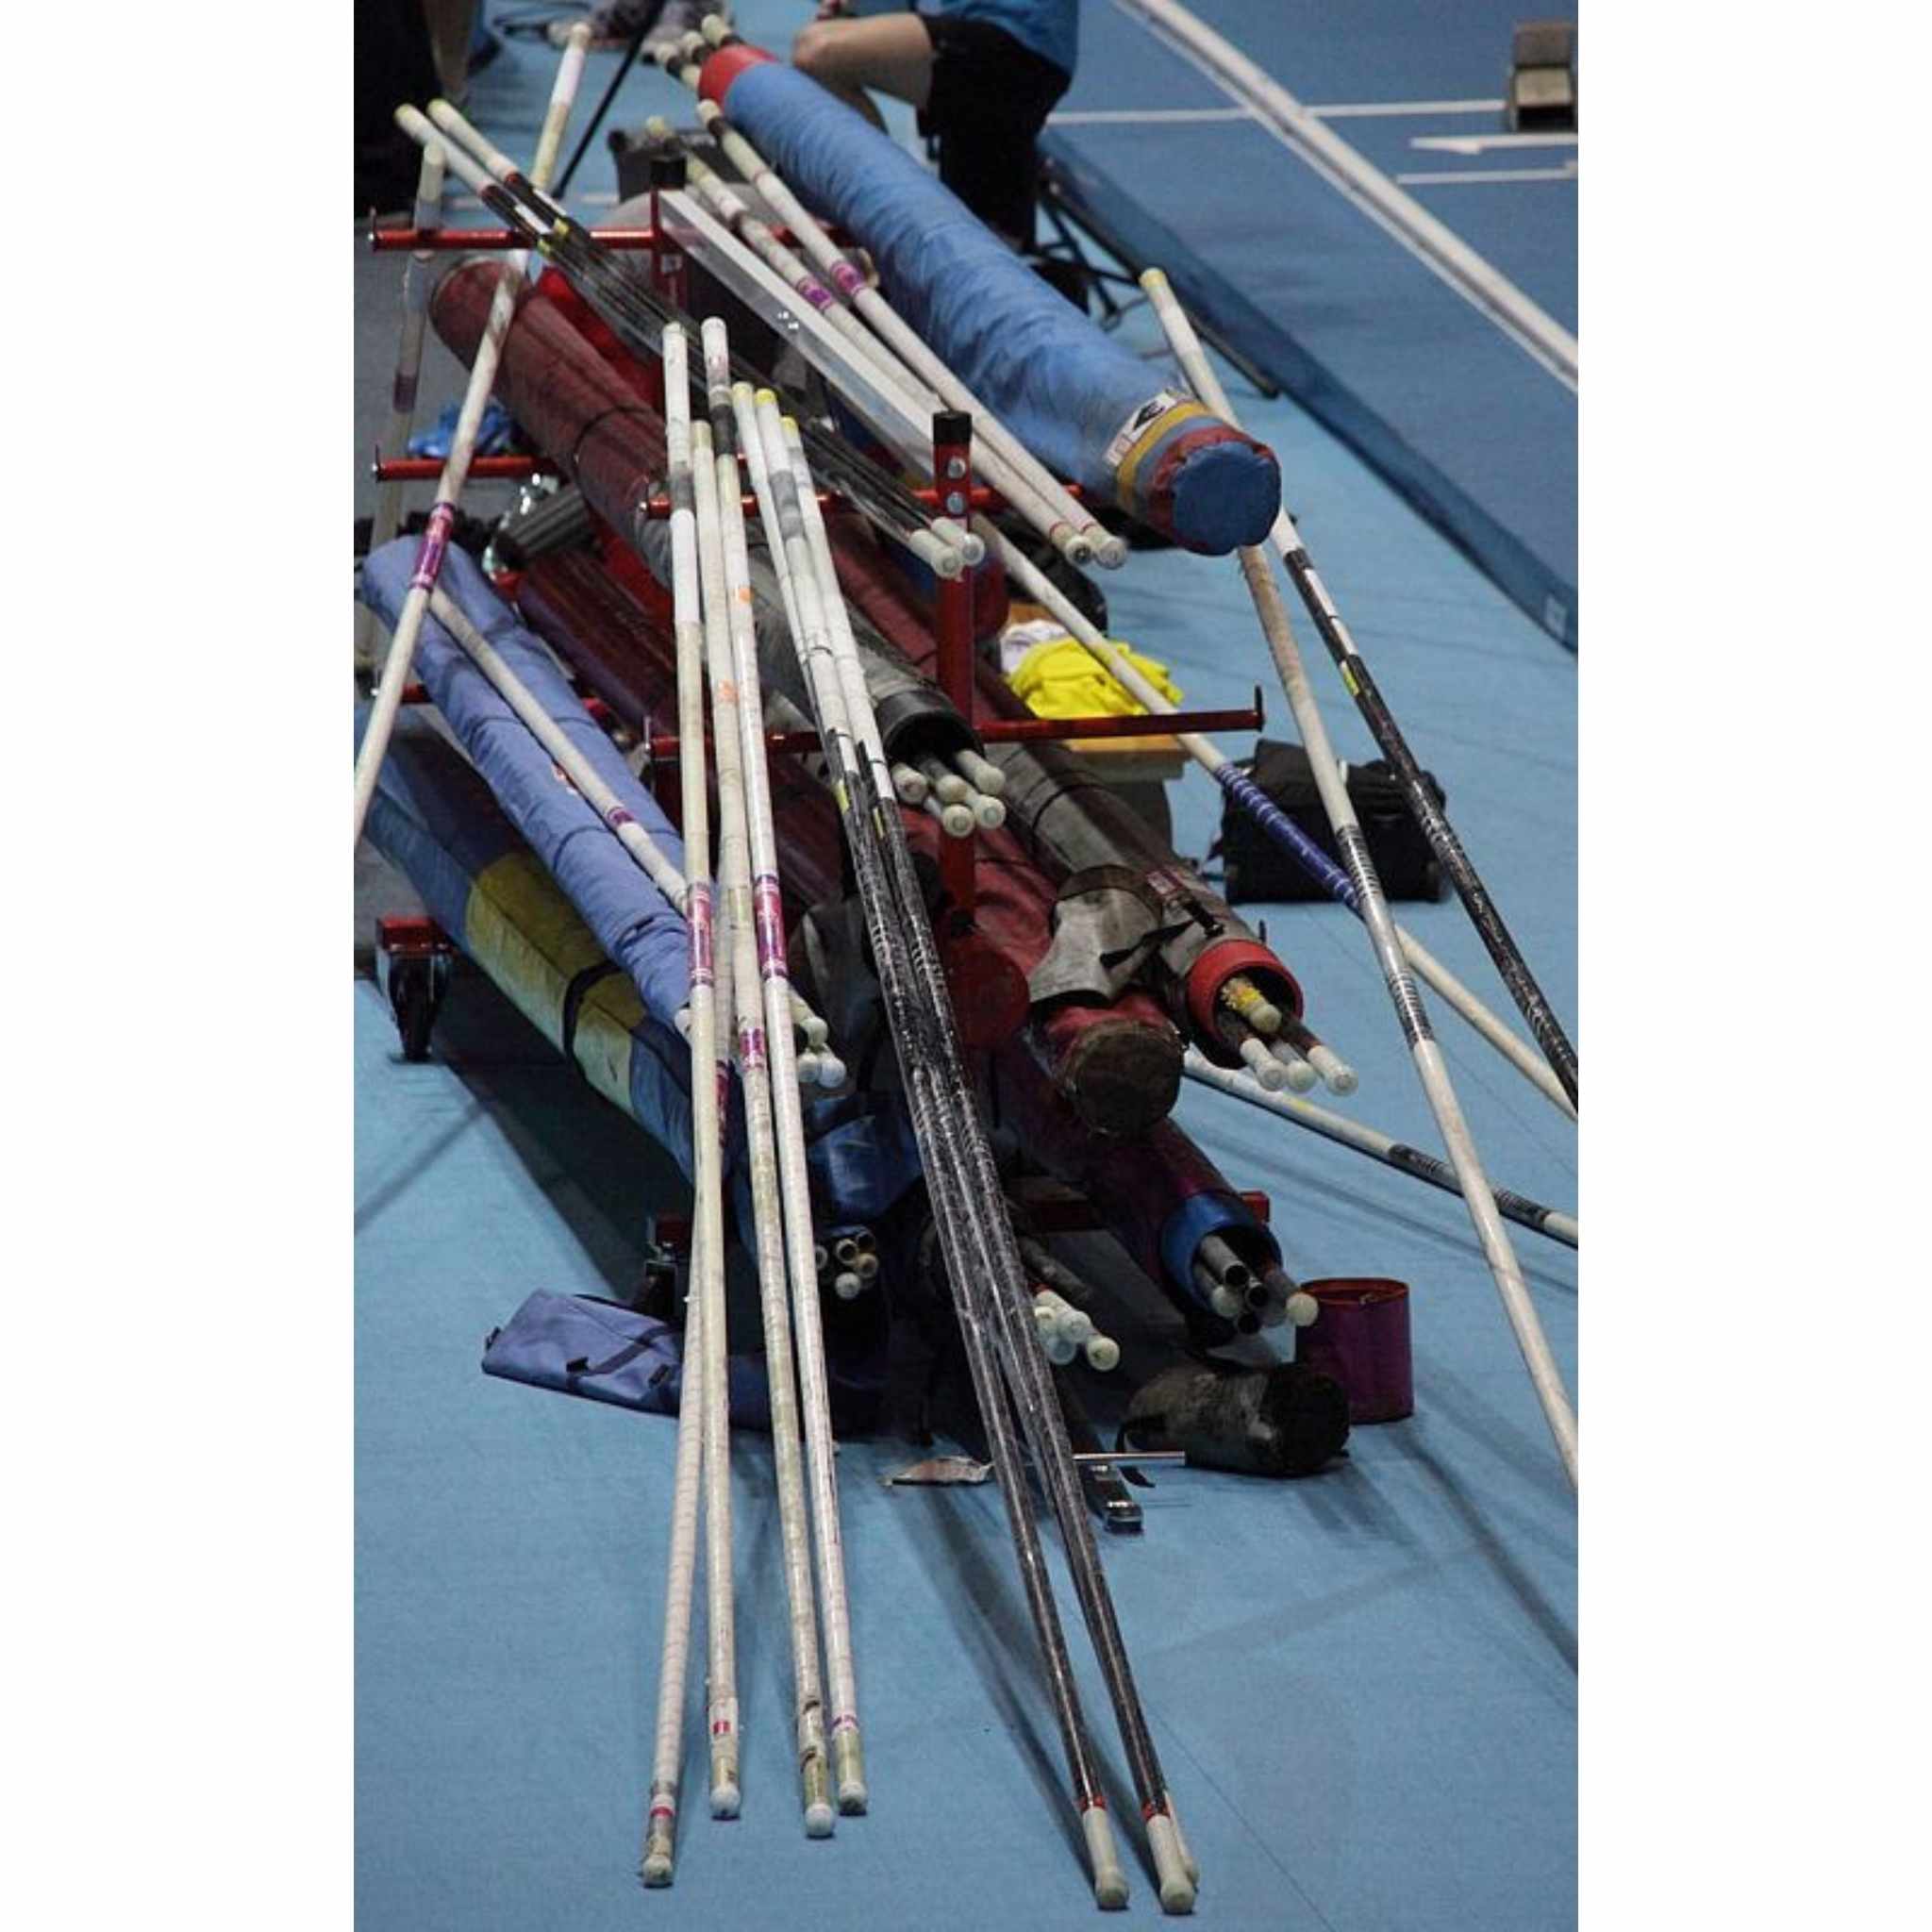 Polanik Pole Cart | Storage and Transport for vaulting poles and cross bars. | Image showing in use